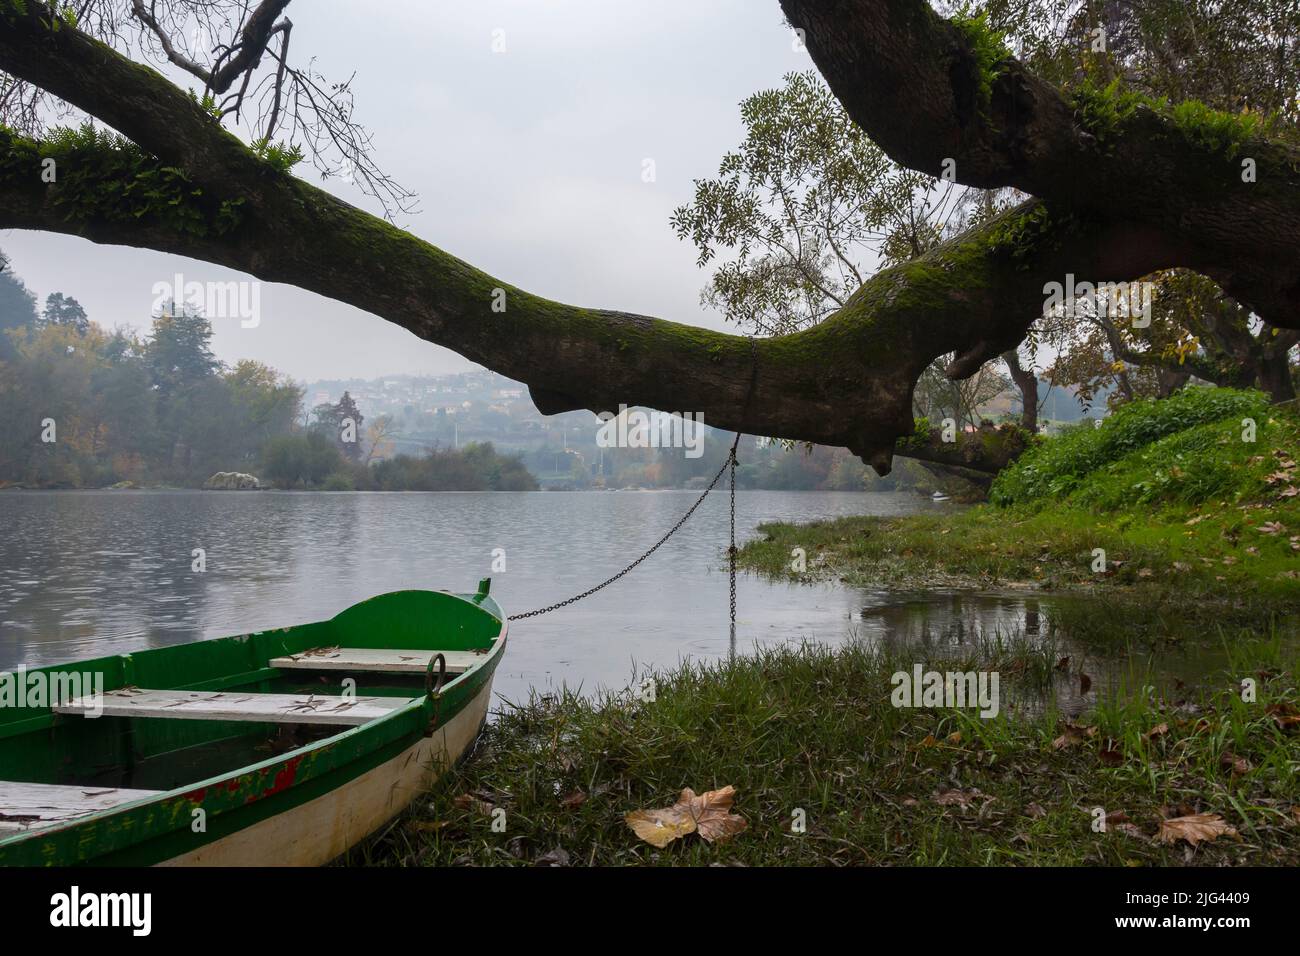 Green rowing boat in the Tamega river  tied to a tree in misty,rainy weather. Amarante, Portugal. Stock Photo